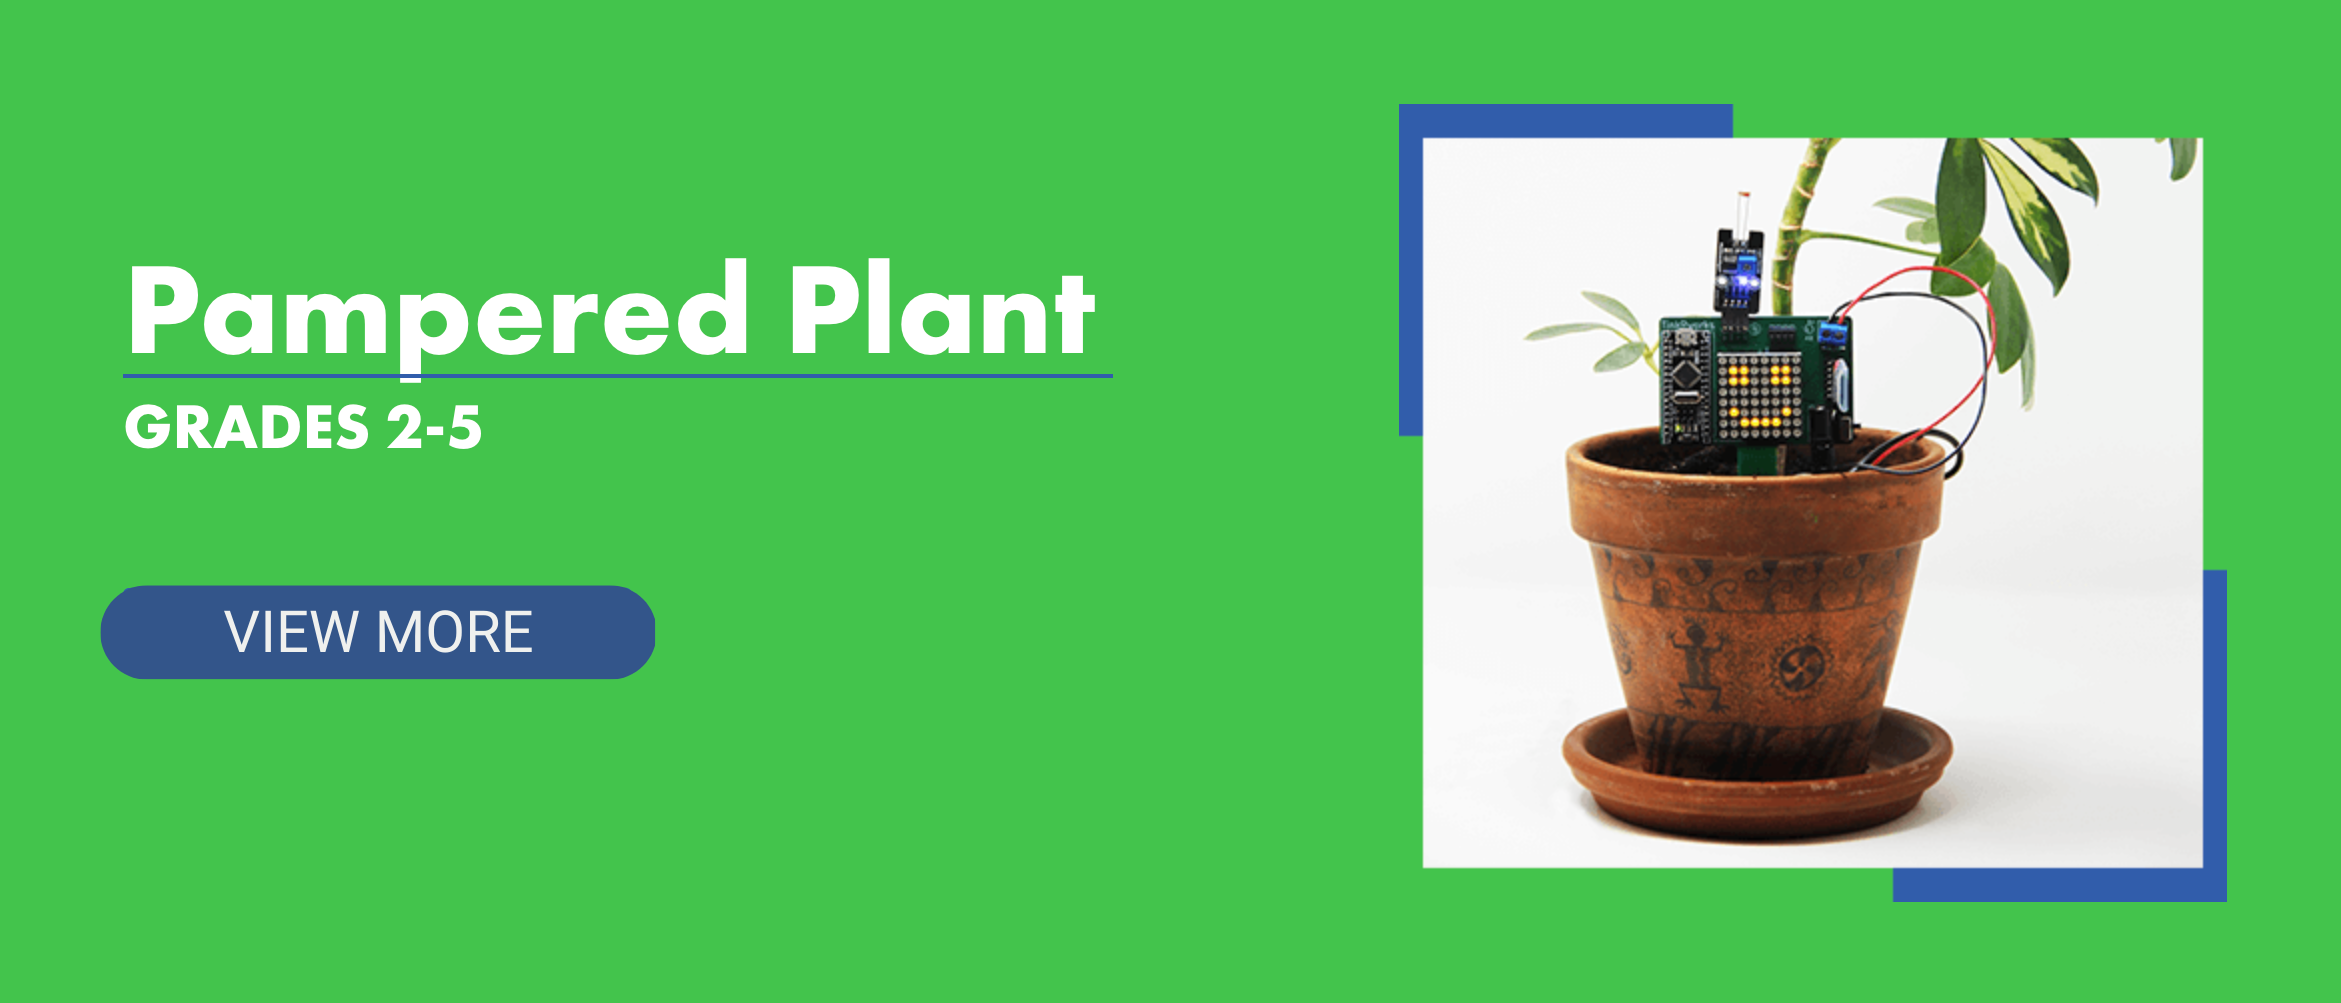 Pampered Plant STEAM Project Learn More